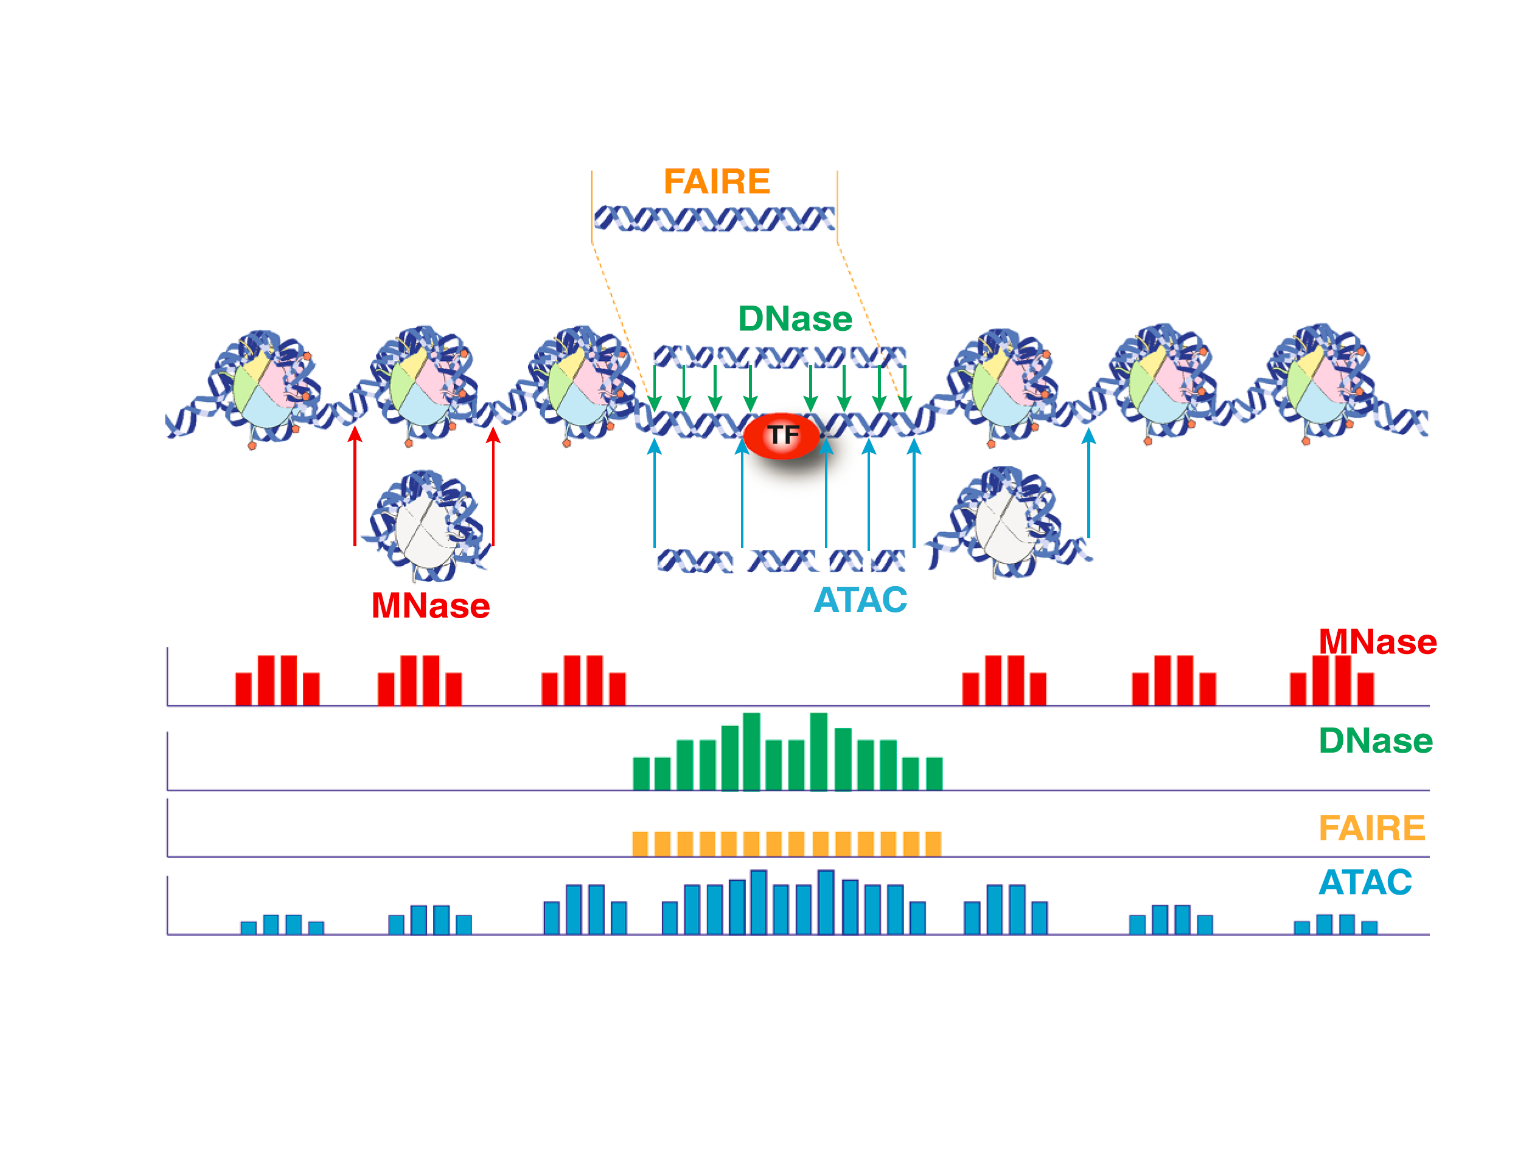 Figure 3. Signal features generated by different methods for profiling chromatin accessibility.